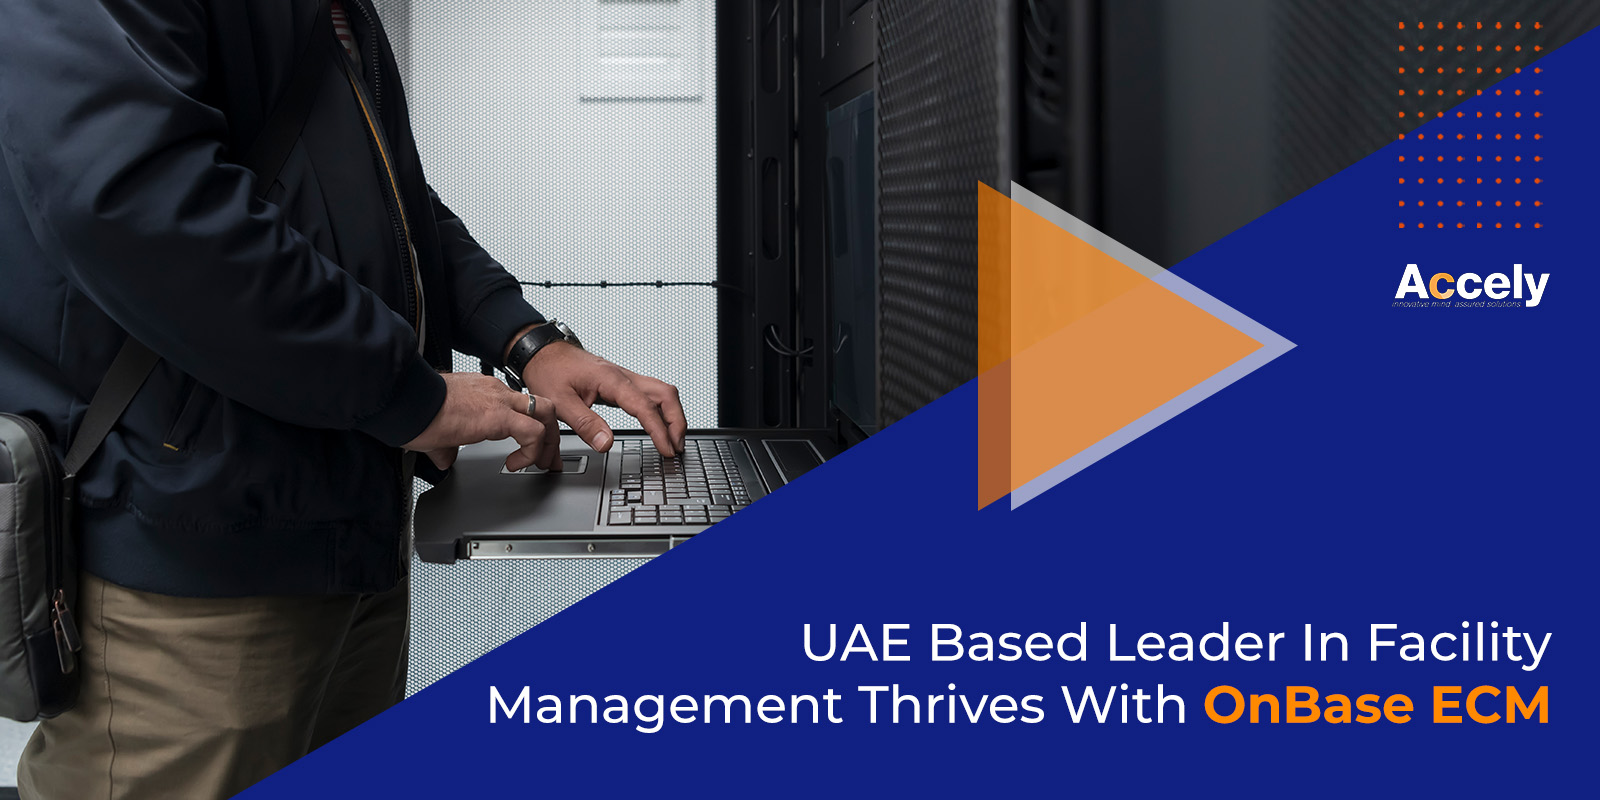 UAE Based Leader In Facility Management Thrives With OnBase ECM